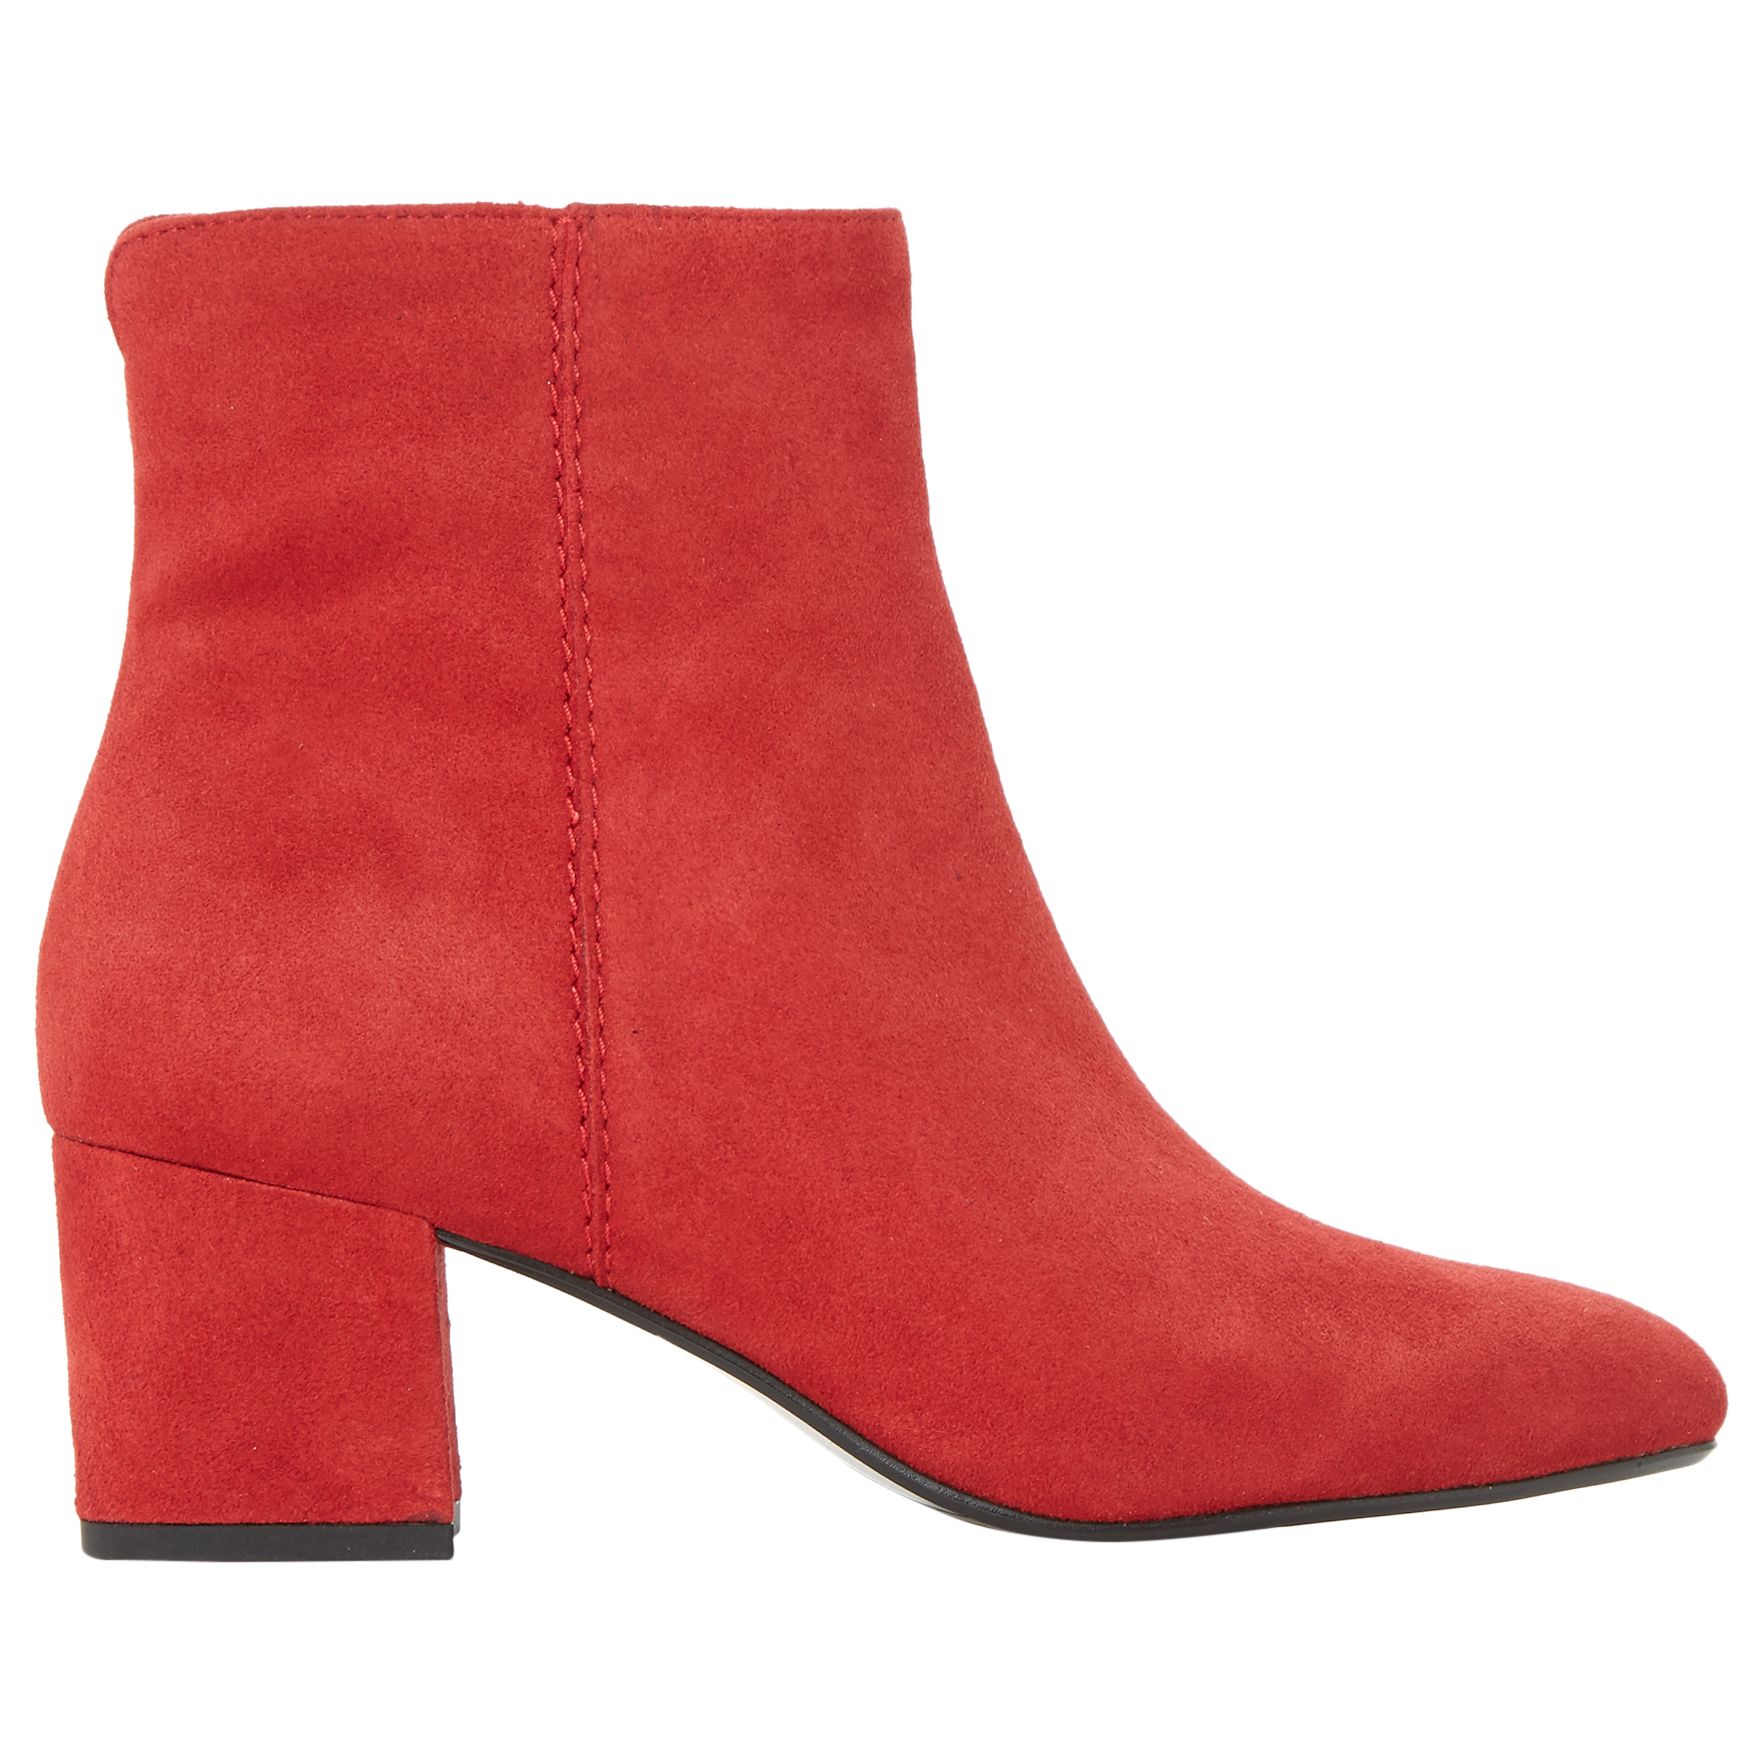 Dune Olyvea Block Heeled Ankle Boots, Red Suede, 7